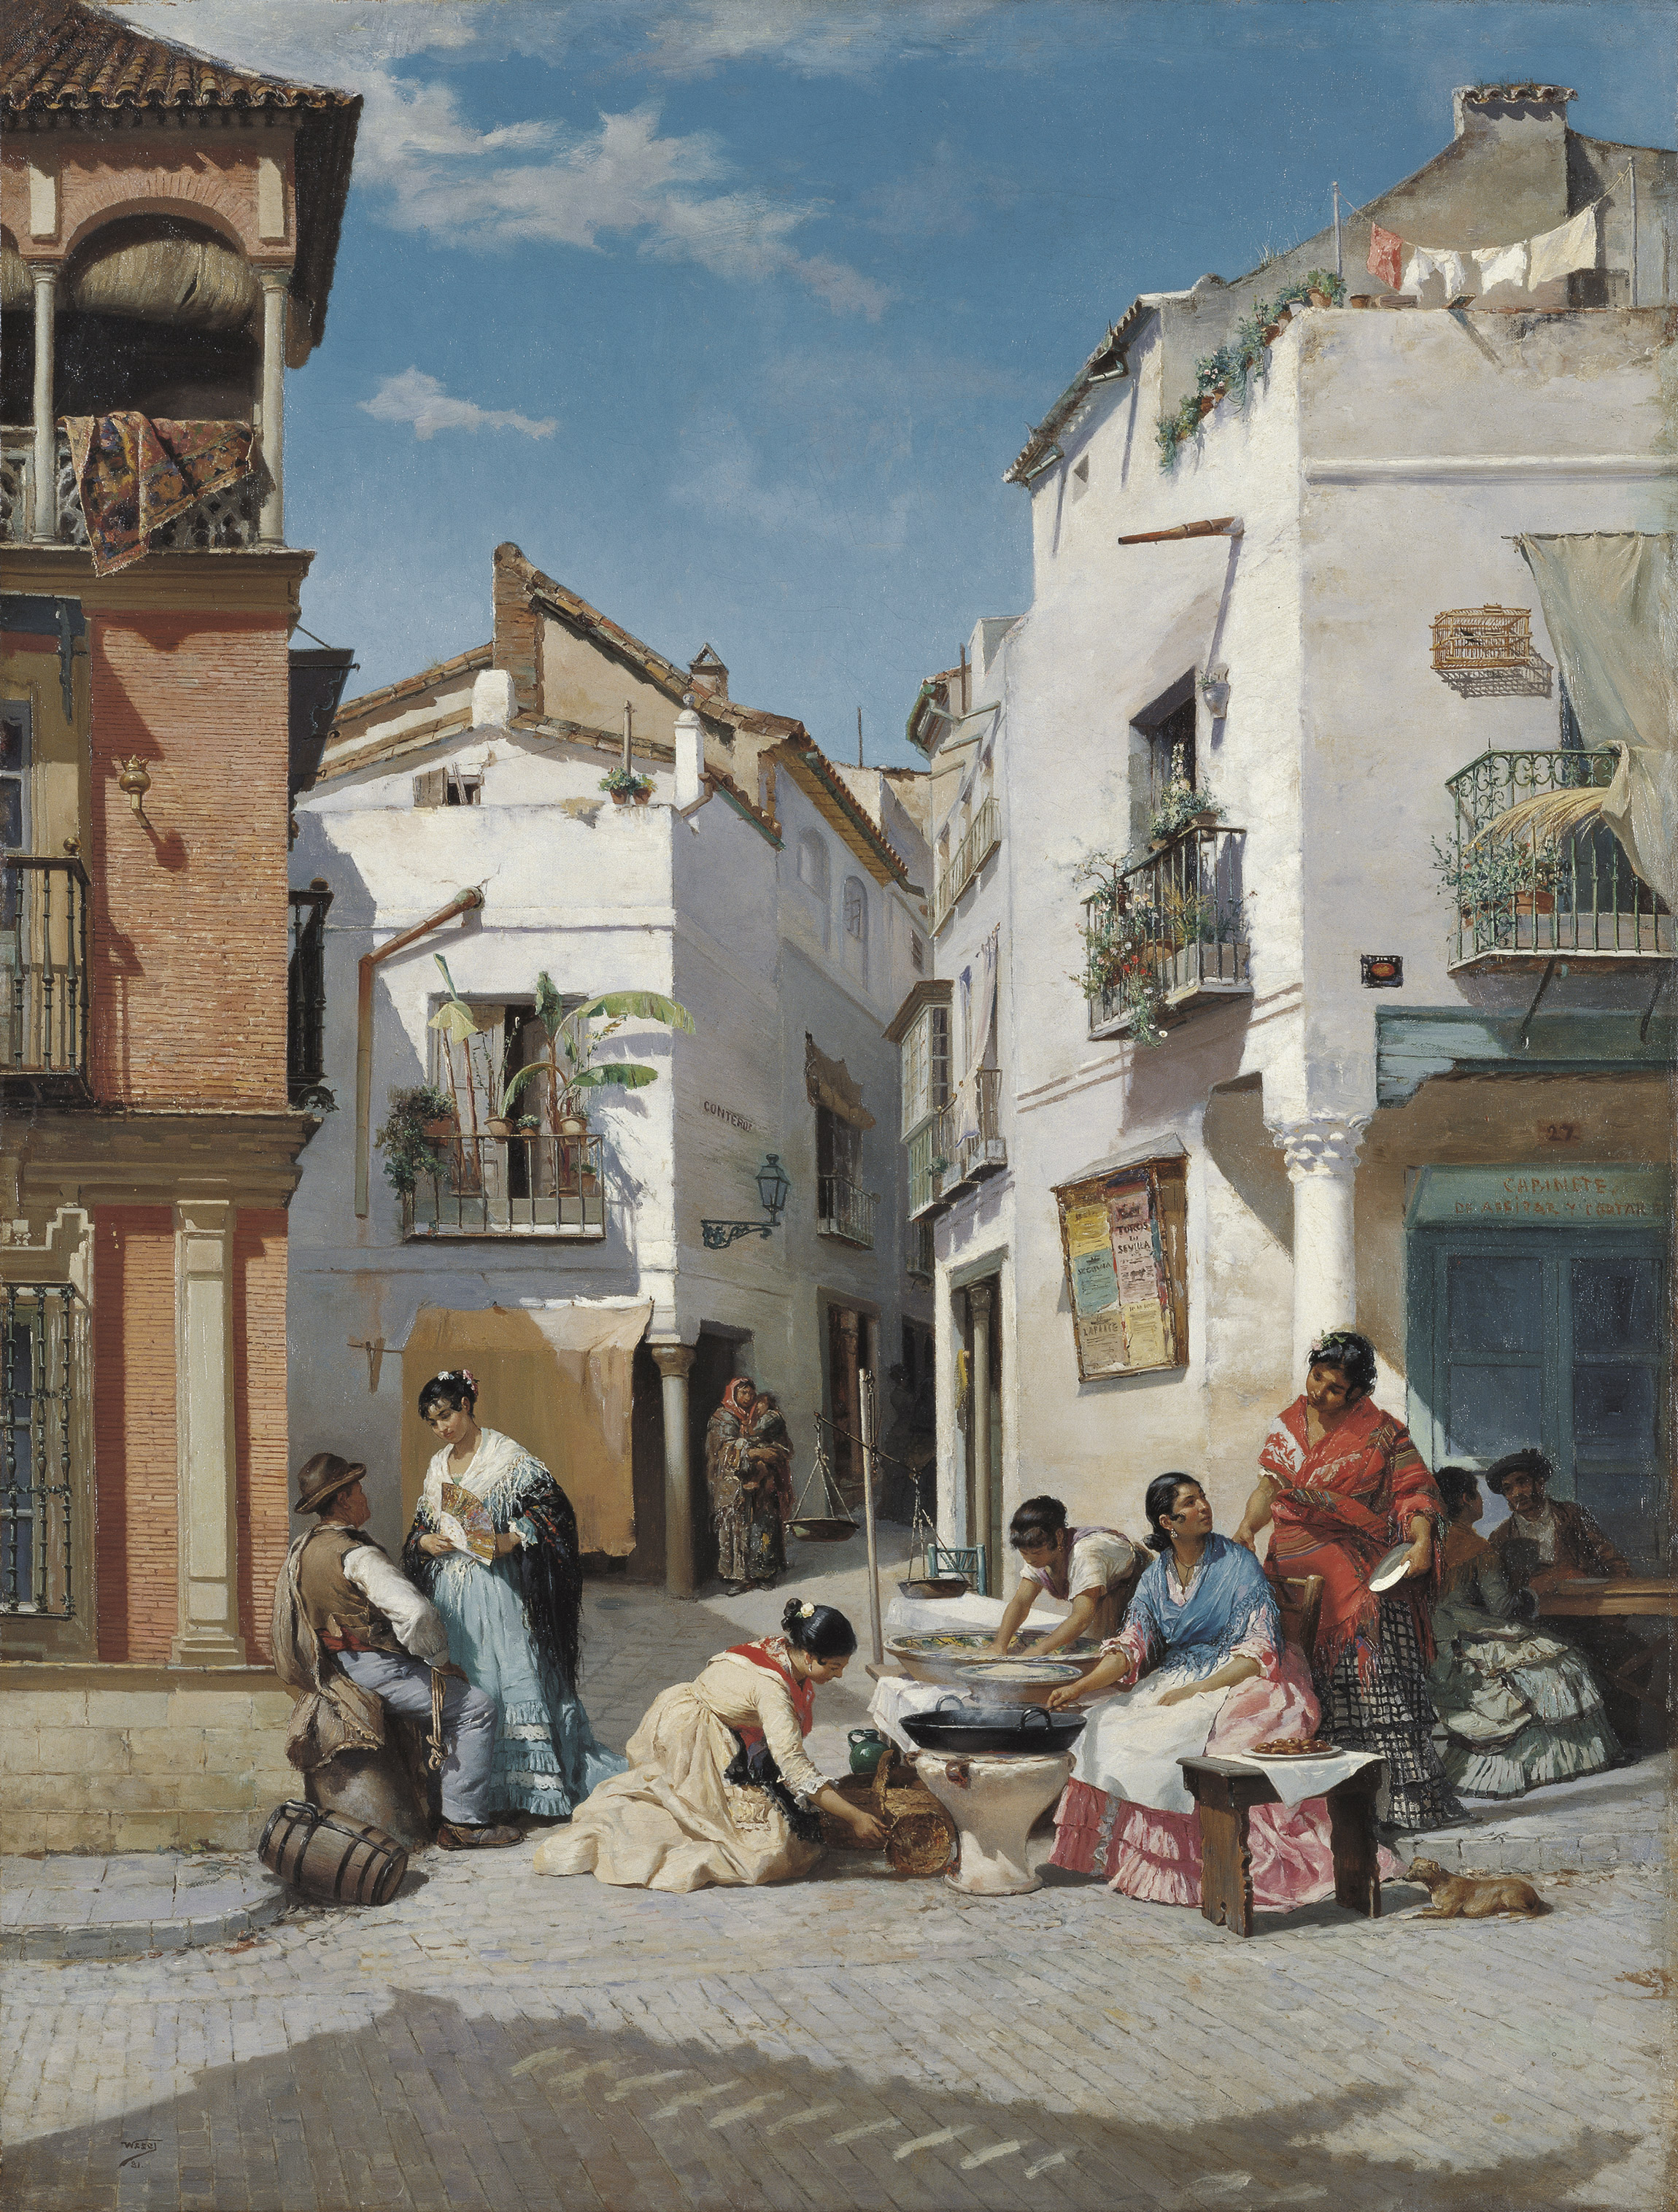 Rosquilla Sellers in a Corner of Seville